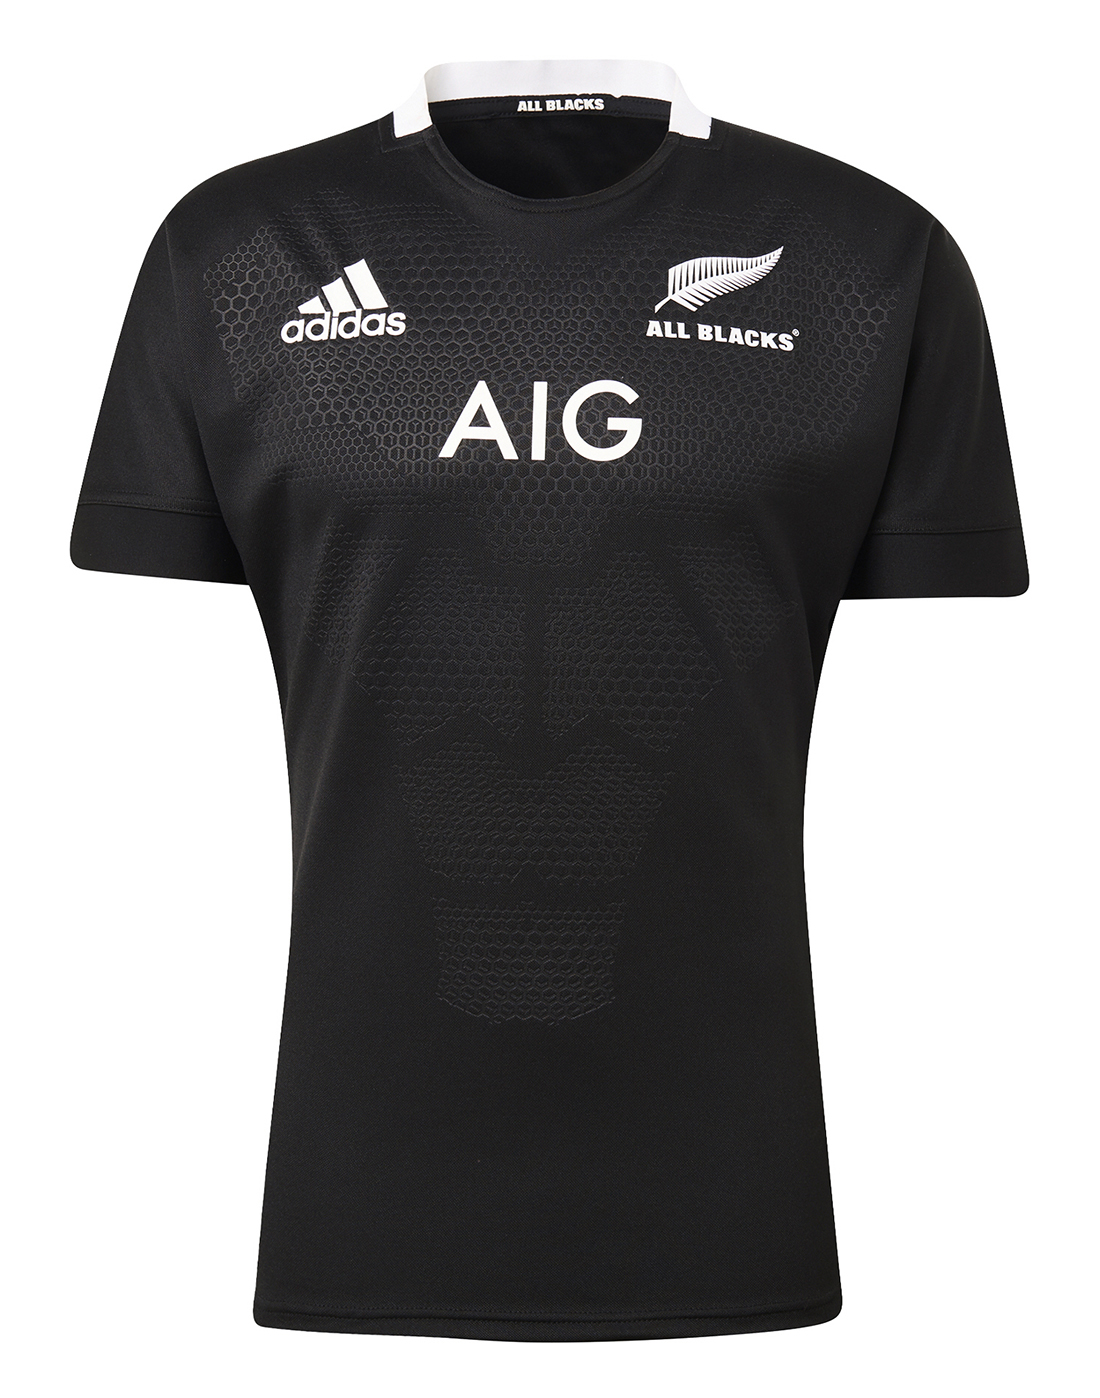 All Blacks Home Rugby Jersey 2019/20 | Life Style Sports